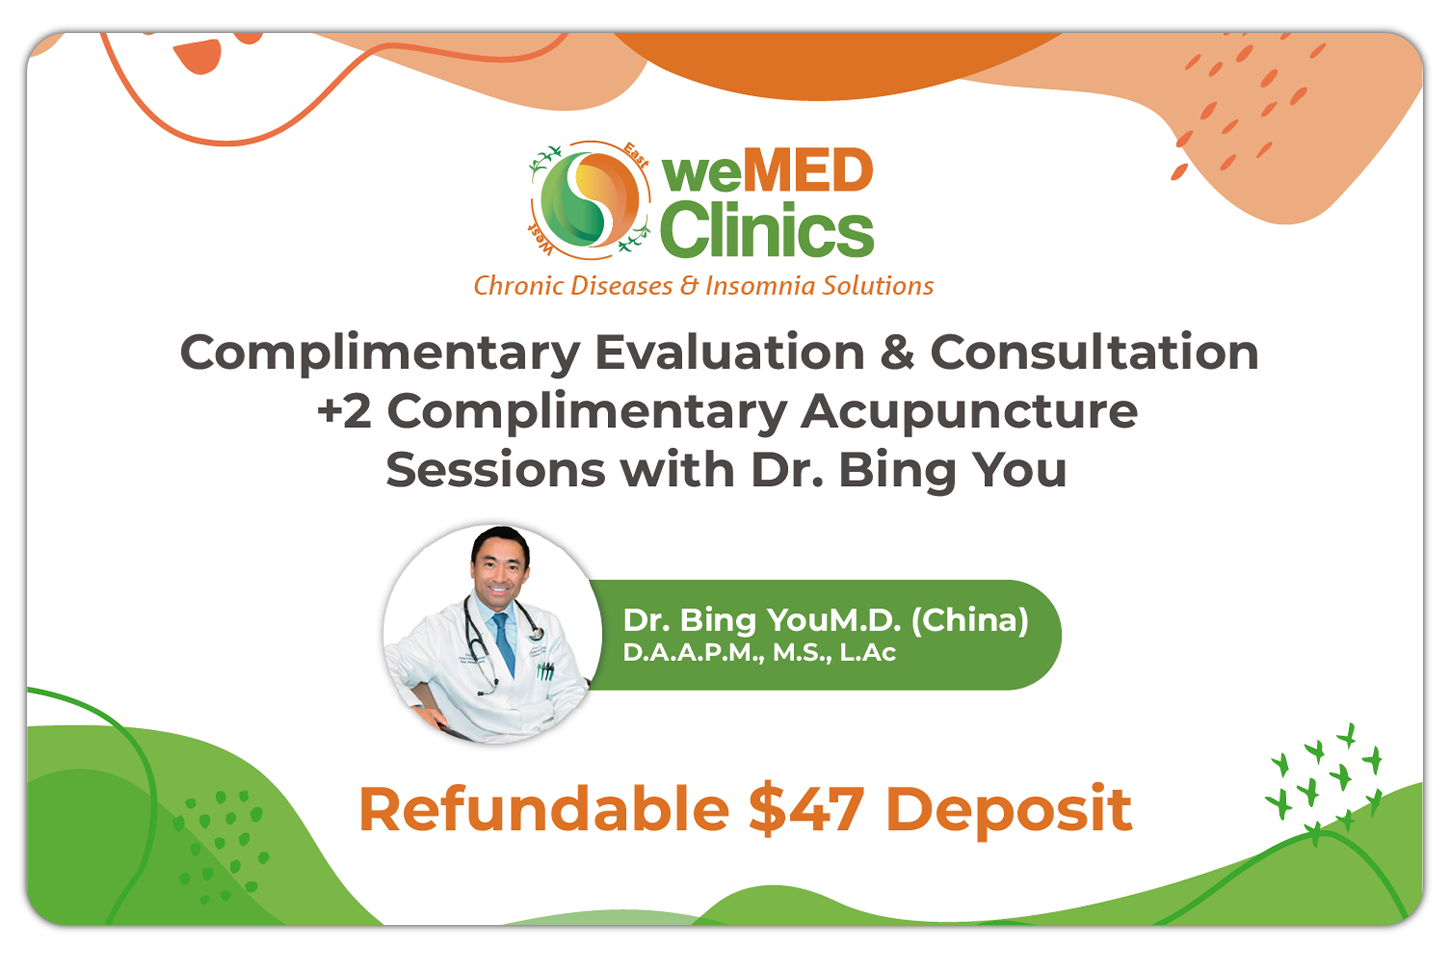 weMEDClinics, Treatment, Acupuncture, Dr. Bing You, China, 2400 FM 1488 #300, The Woodlands, TX 77384